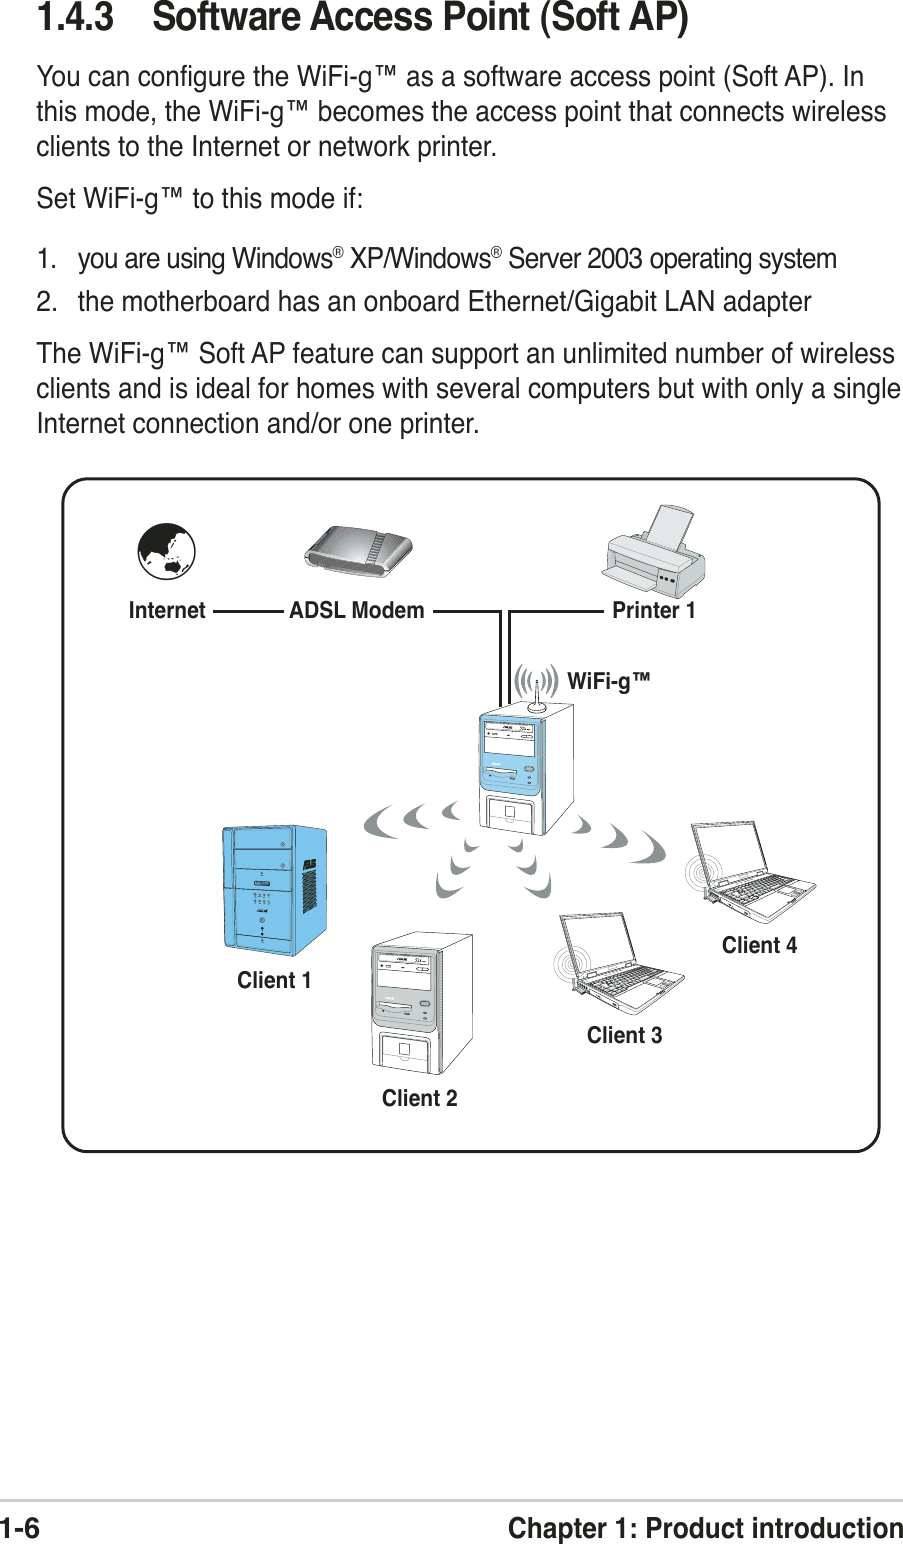 1-6Chapter 1: Product introduction1.4.3 Software Access Point (Soft AP)You can configure the WiFi-g™ as a software access point (Soft AP). Inthis mode, the WiFi-g™ becomes the access point that connects wirelessclients to the Internet or network printer.Set WiFi-g™ to this mode if:1. you are using Windows® XP/Windows® Server 2003 operating system2. the motherboard has an onboard Ethernet/Gigabit LAN adapterThe WiFi-g™ Soft AP feature can support an unlimited number of wirelessclients and is ideal for homes with several computers but with only a singleInternet connection and/or one printer.Internet ADSL ModemPrinter 1Client 1Client 2Client 3Client 4WiFi-g™MODE